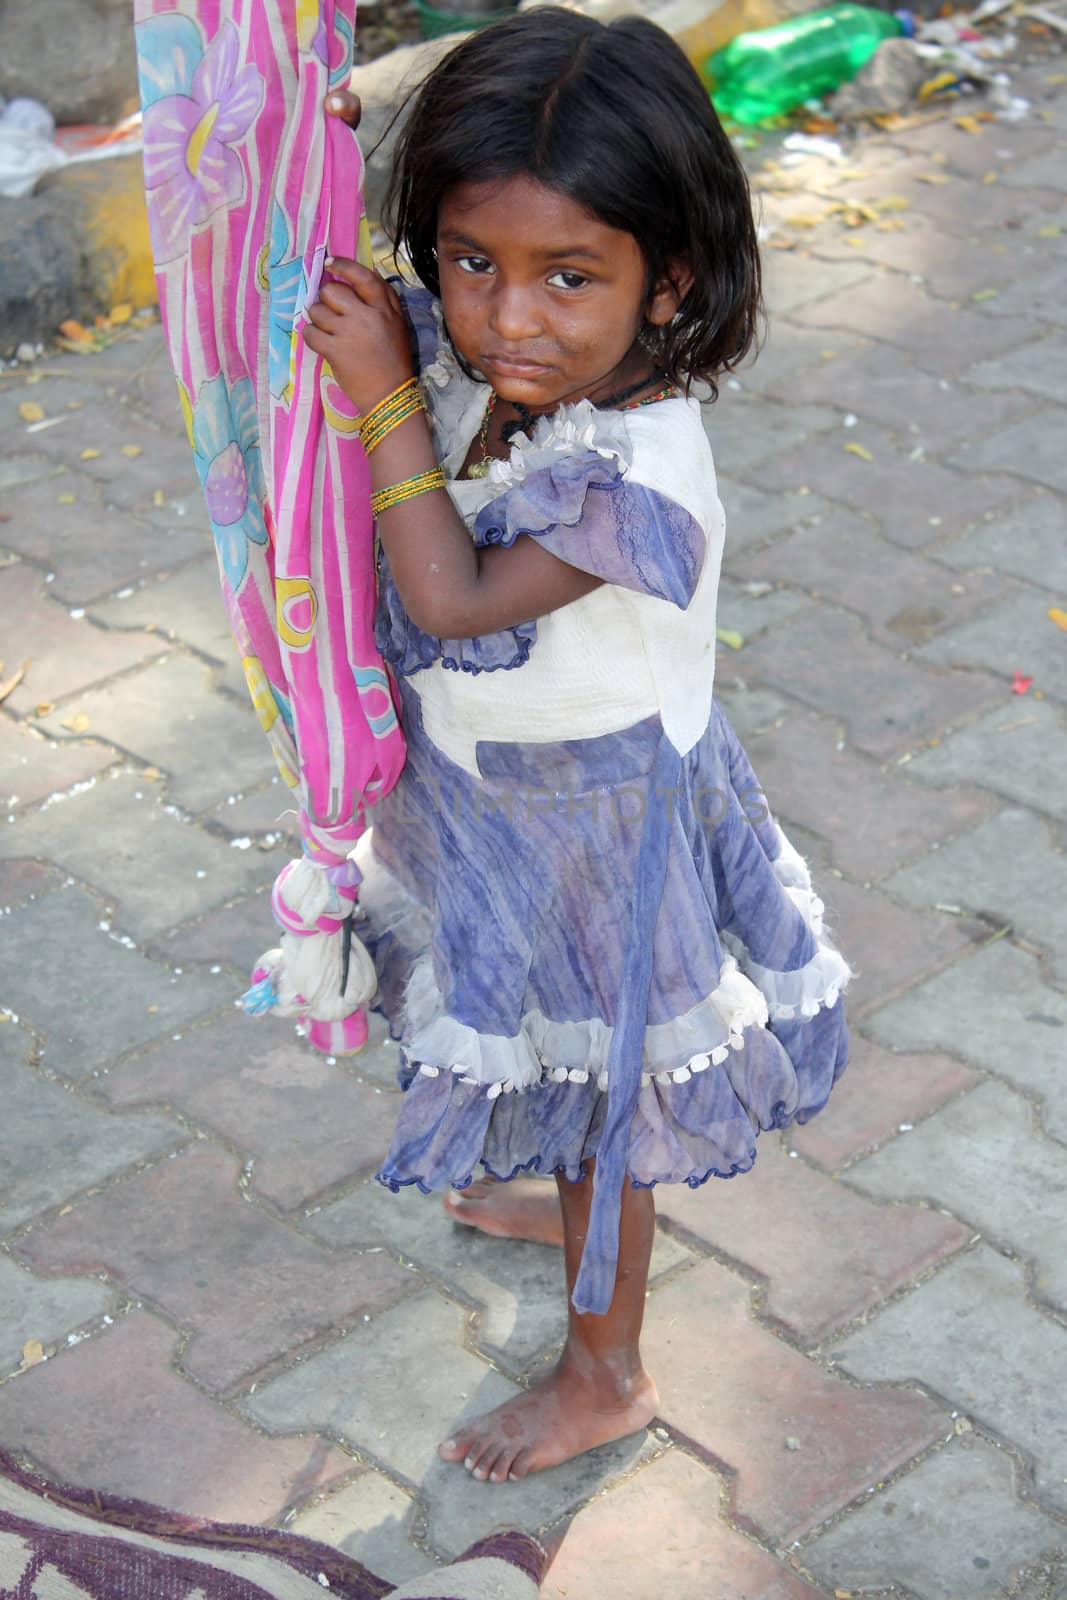 A sad poor girl having no one to play with, on an Indian street-side.